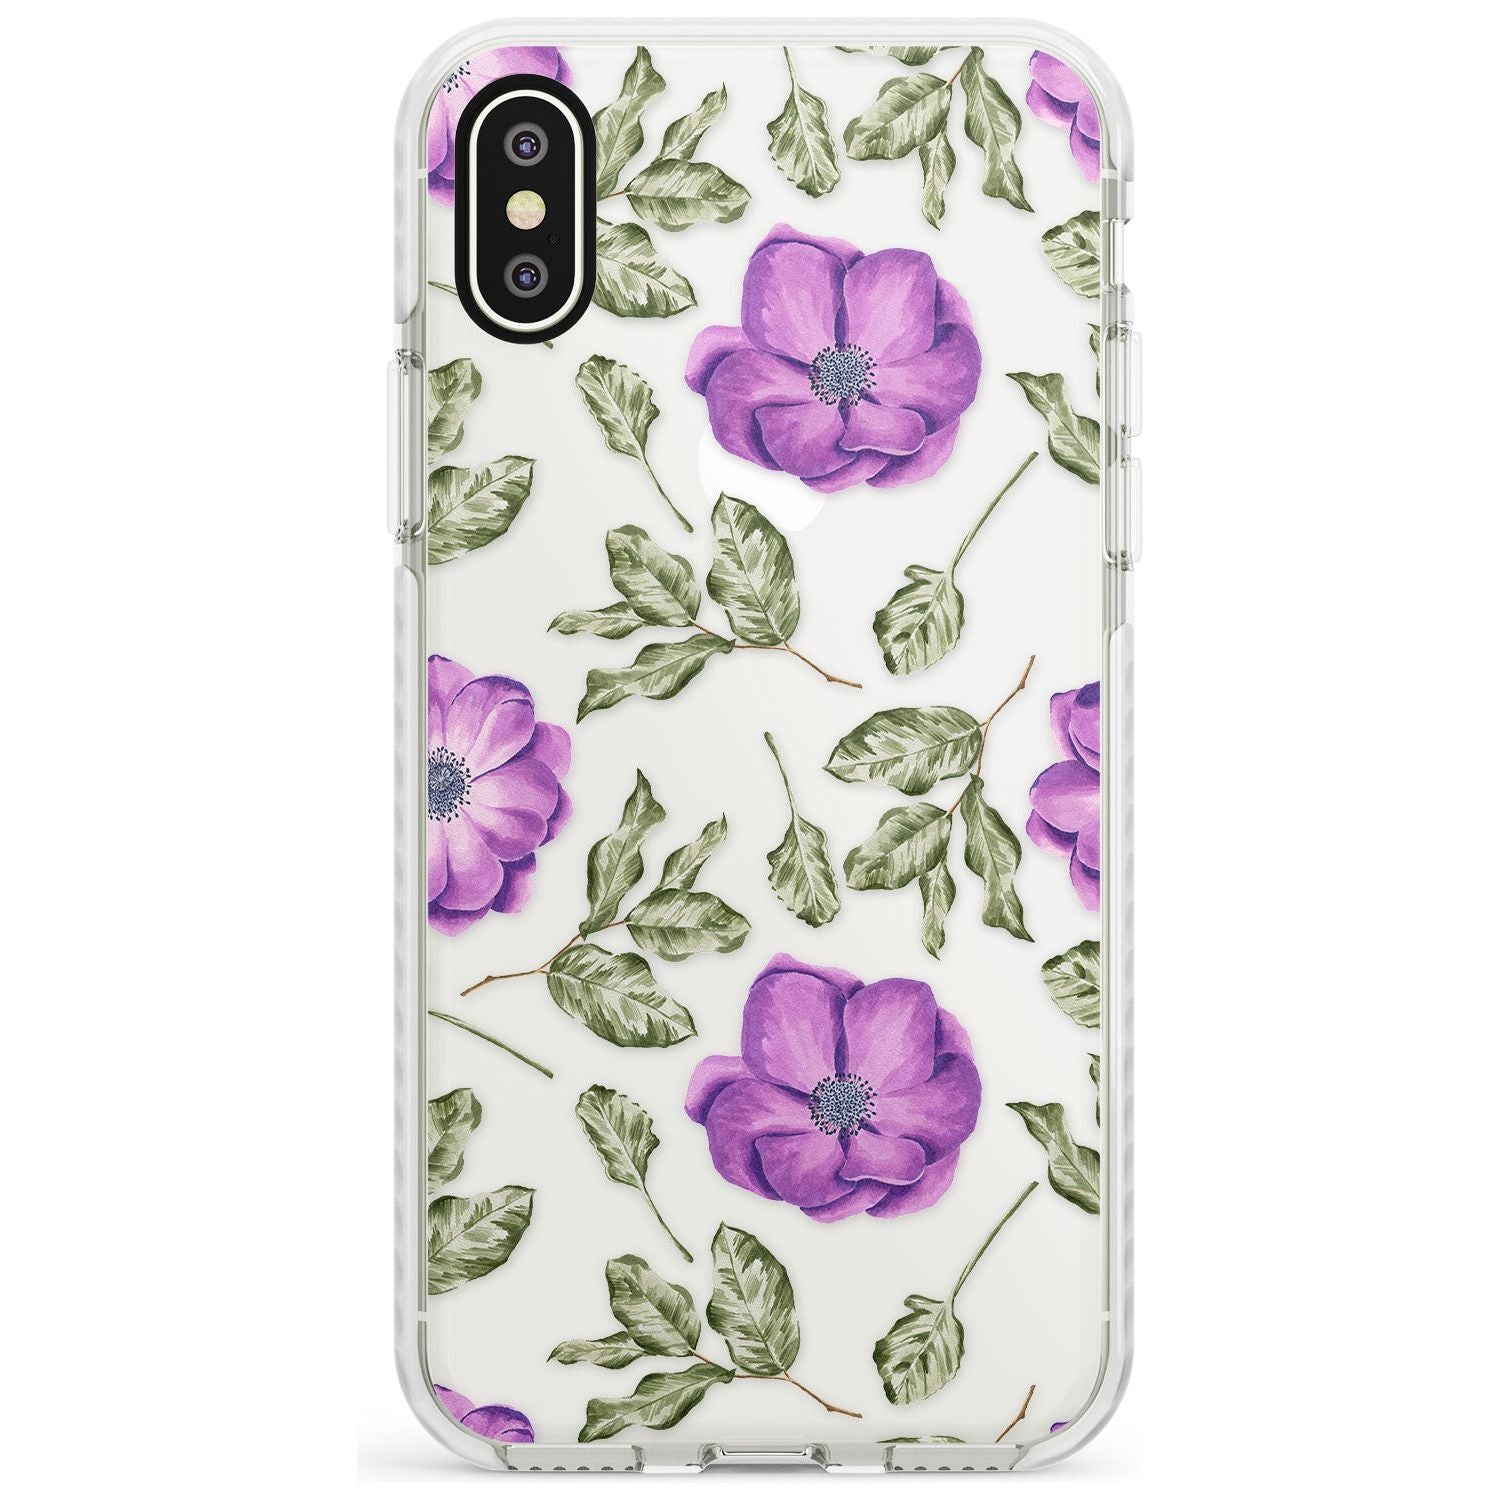 Purple Blossoms Transparent Floral Impact Phone Case for iPhone X XS Max XR